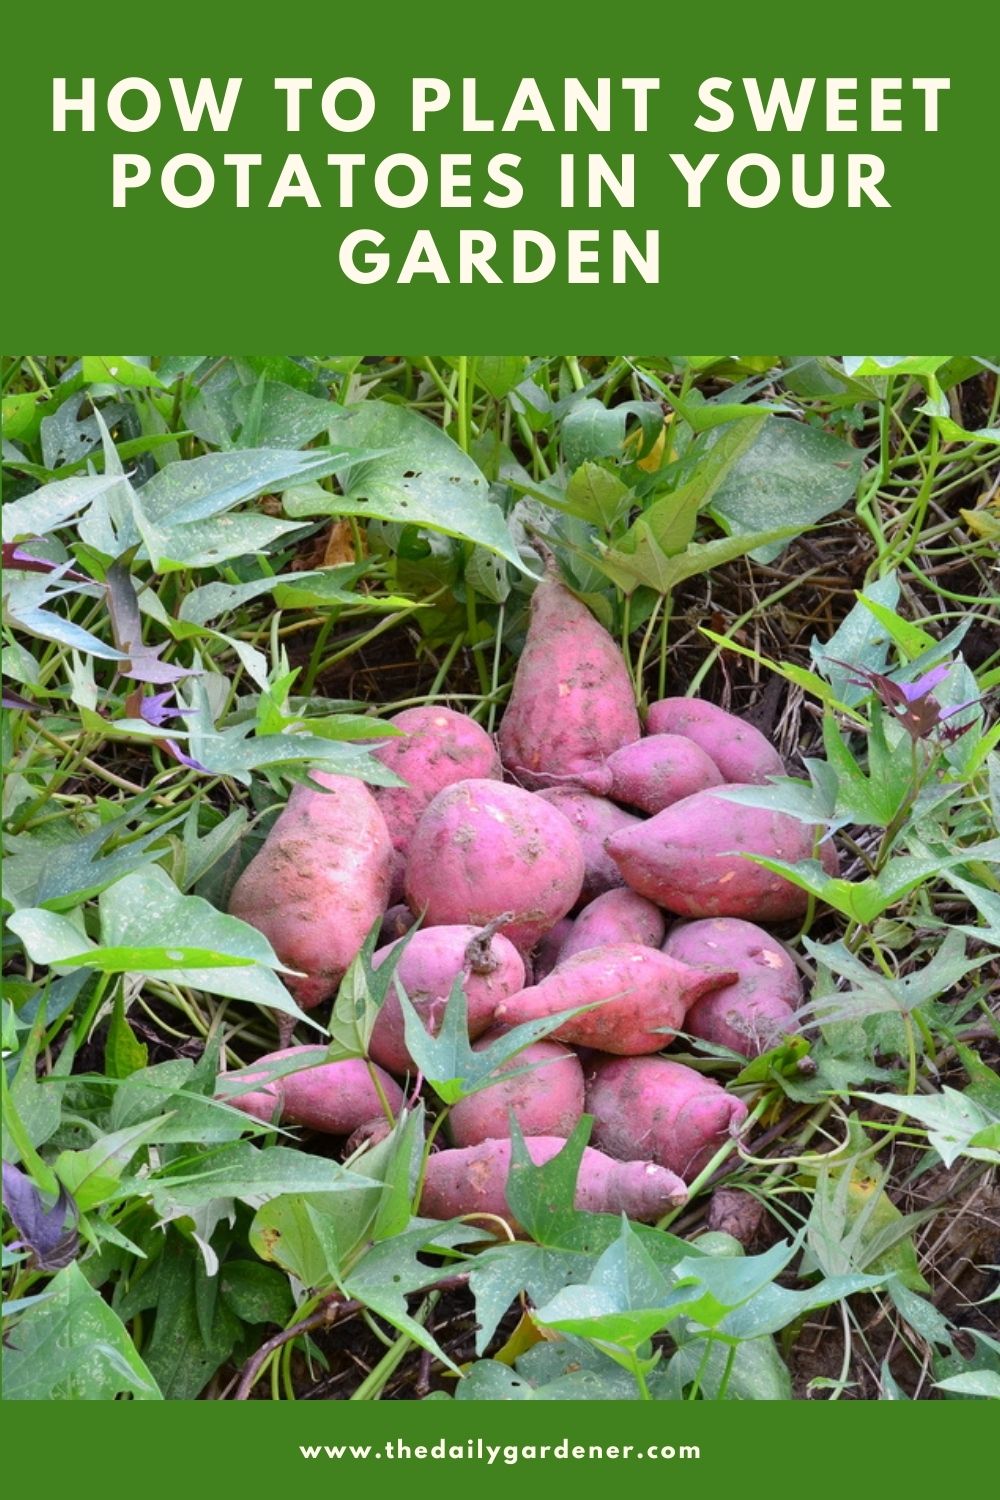 How to Plant Sweet Potatoes in Your Garden (Tricks to Care!)2